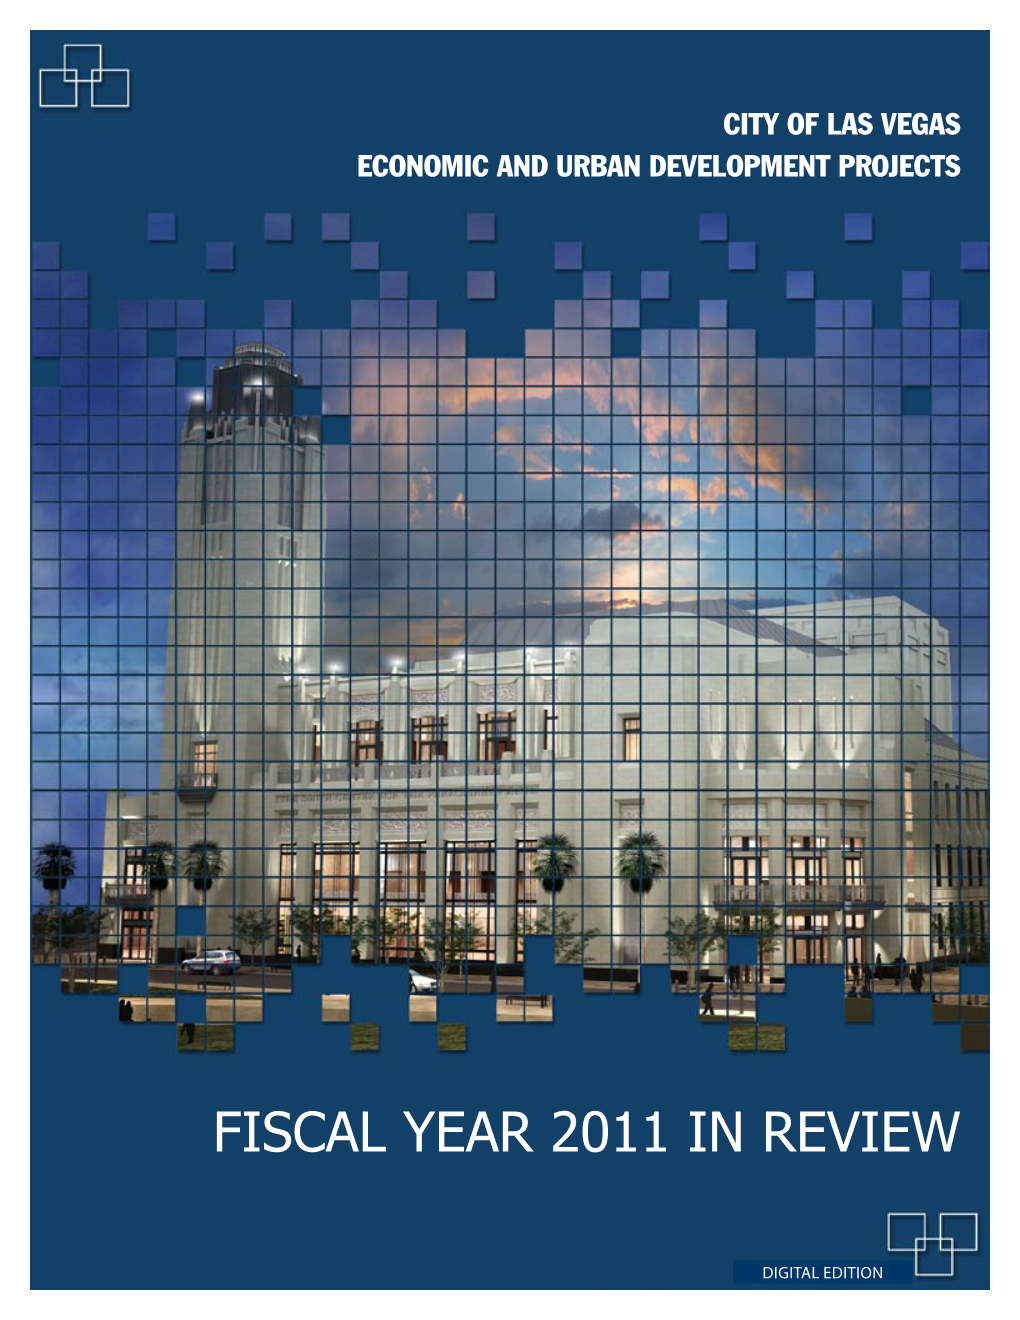 Fiscal Year 2011 in Review